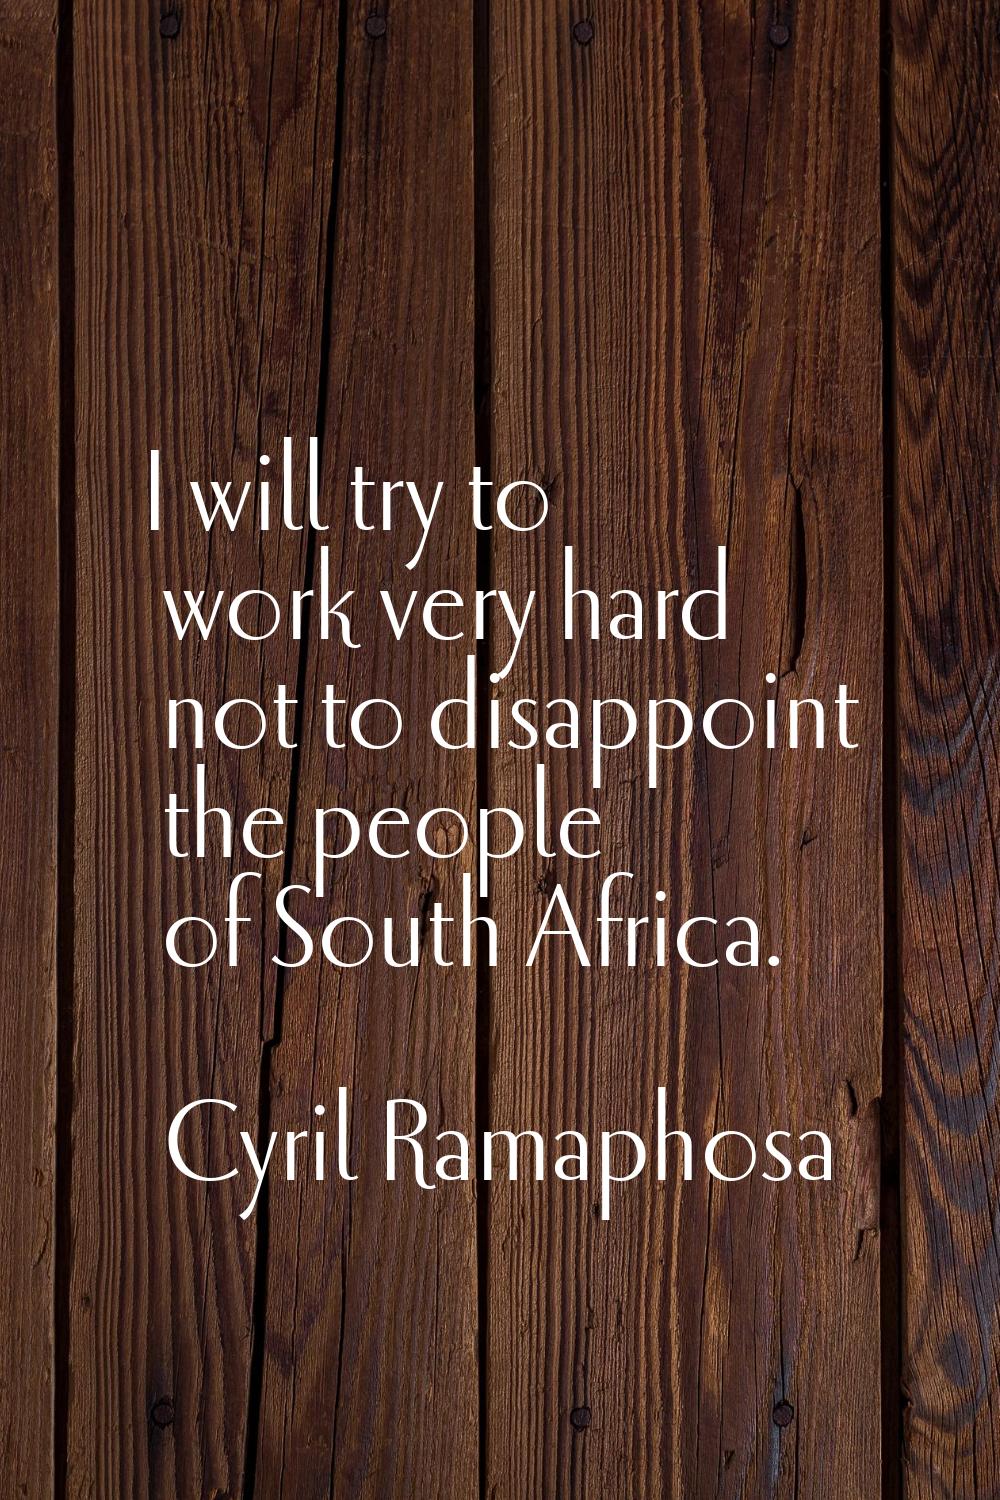 I will try to work very hard not to disappoint the people of South Africa.